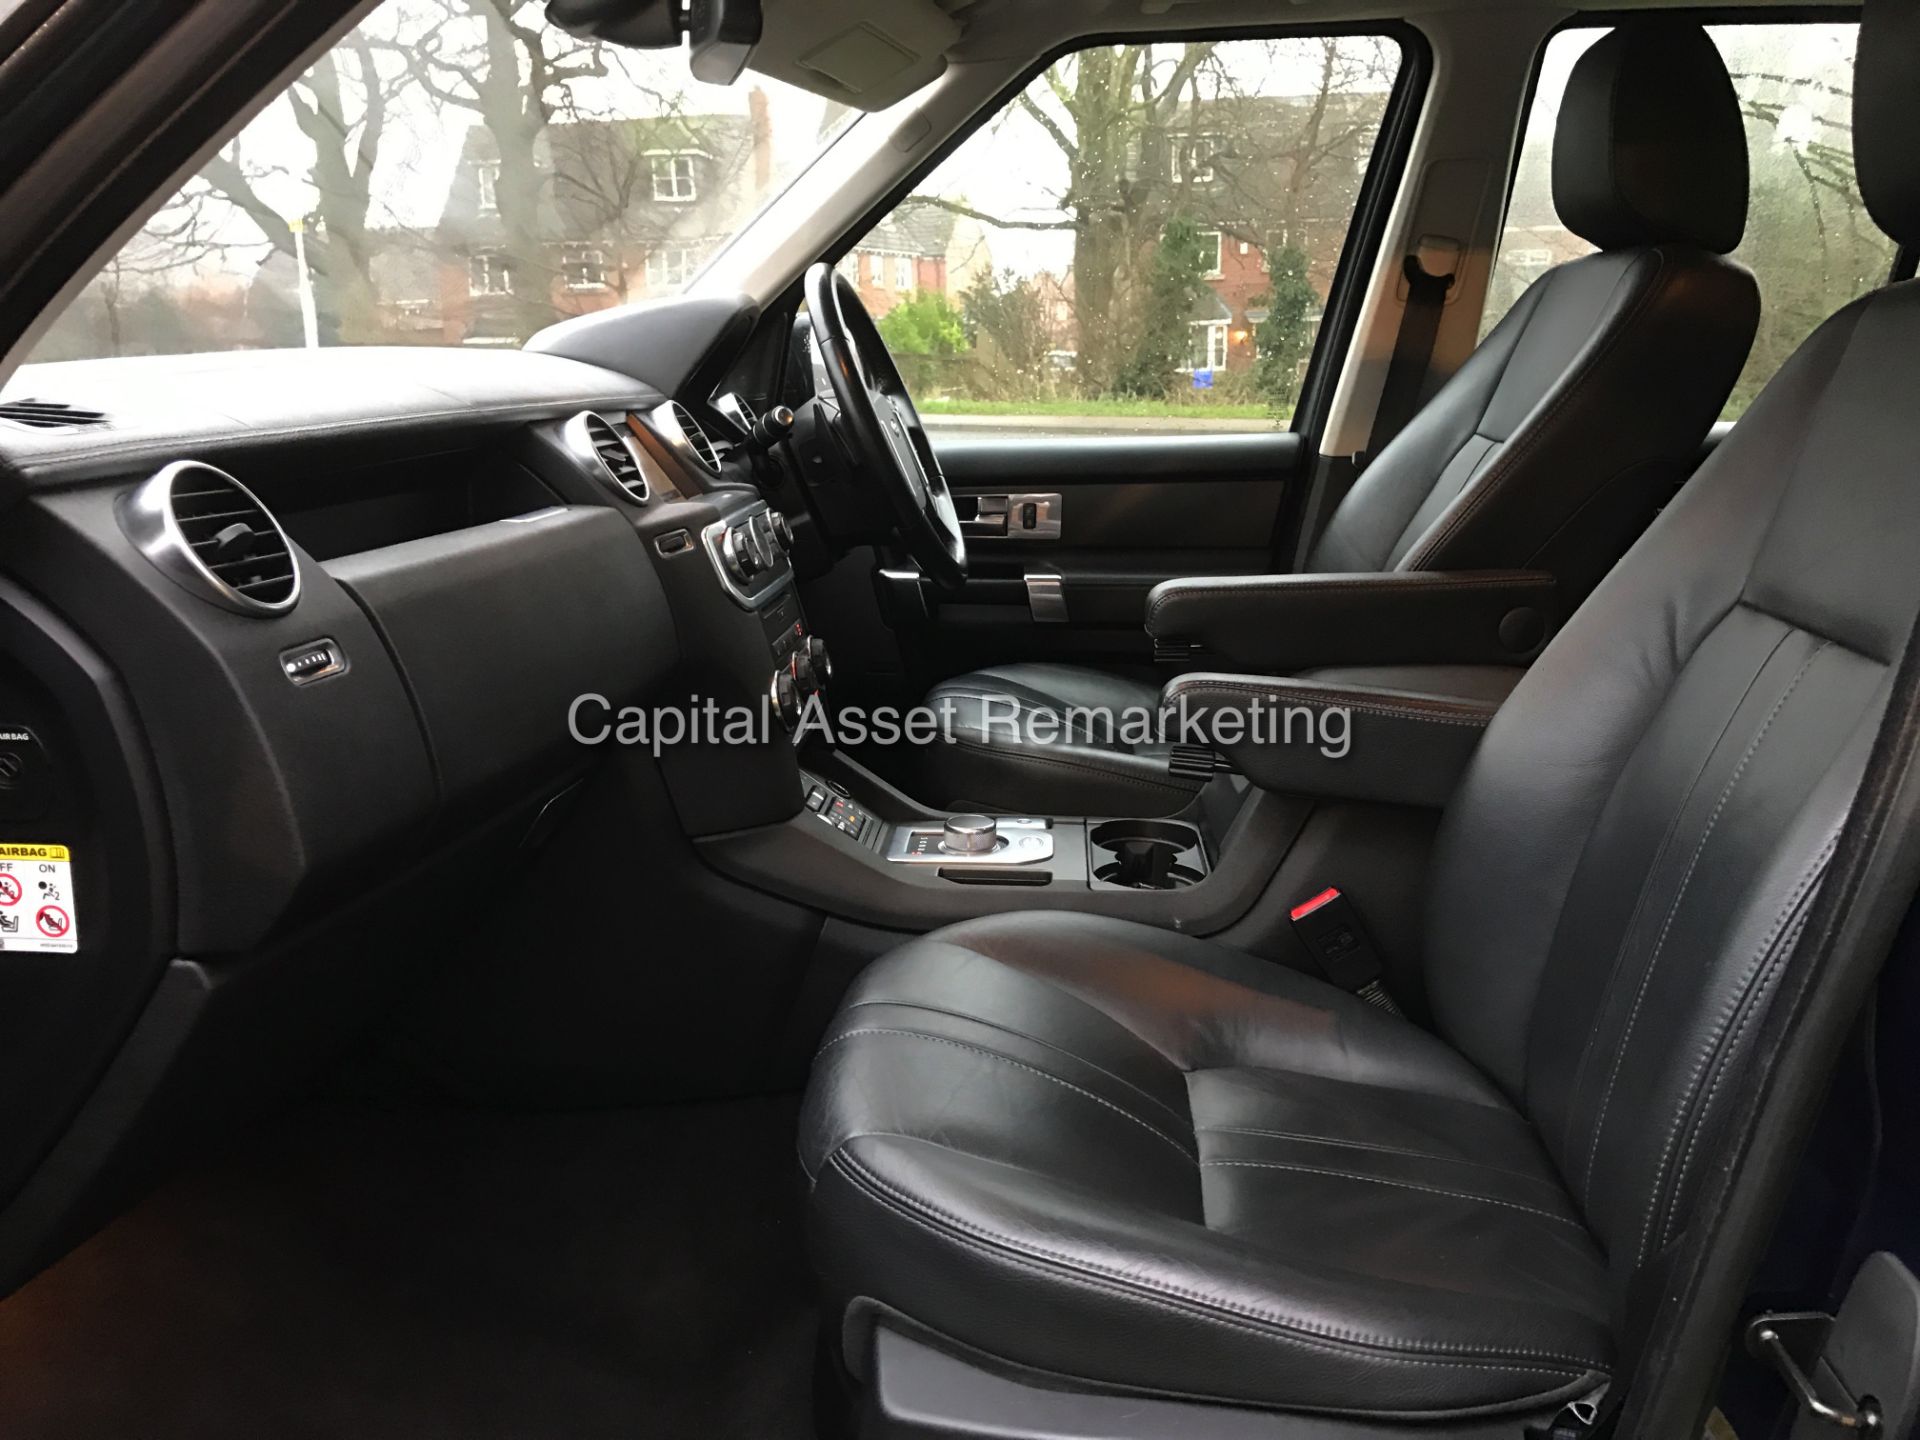 LANDROVER DISCOVERY 3.0 "SDV6 - XS" AUTO (2013 MODEL) 1 OWNER - LOW MILES / FSH - NAV - LEATHER - Image 12 of 21